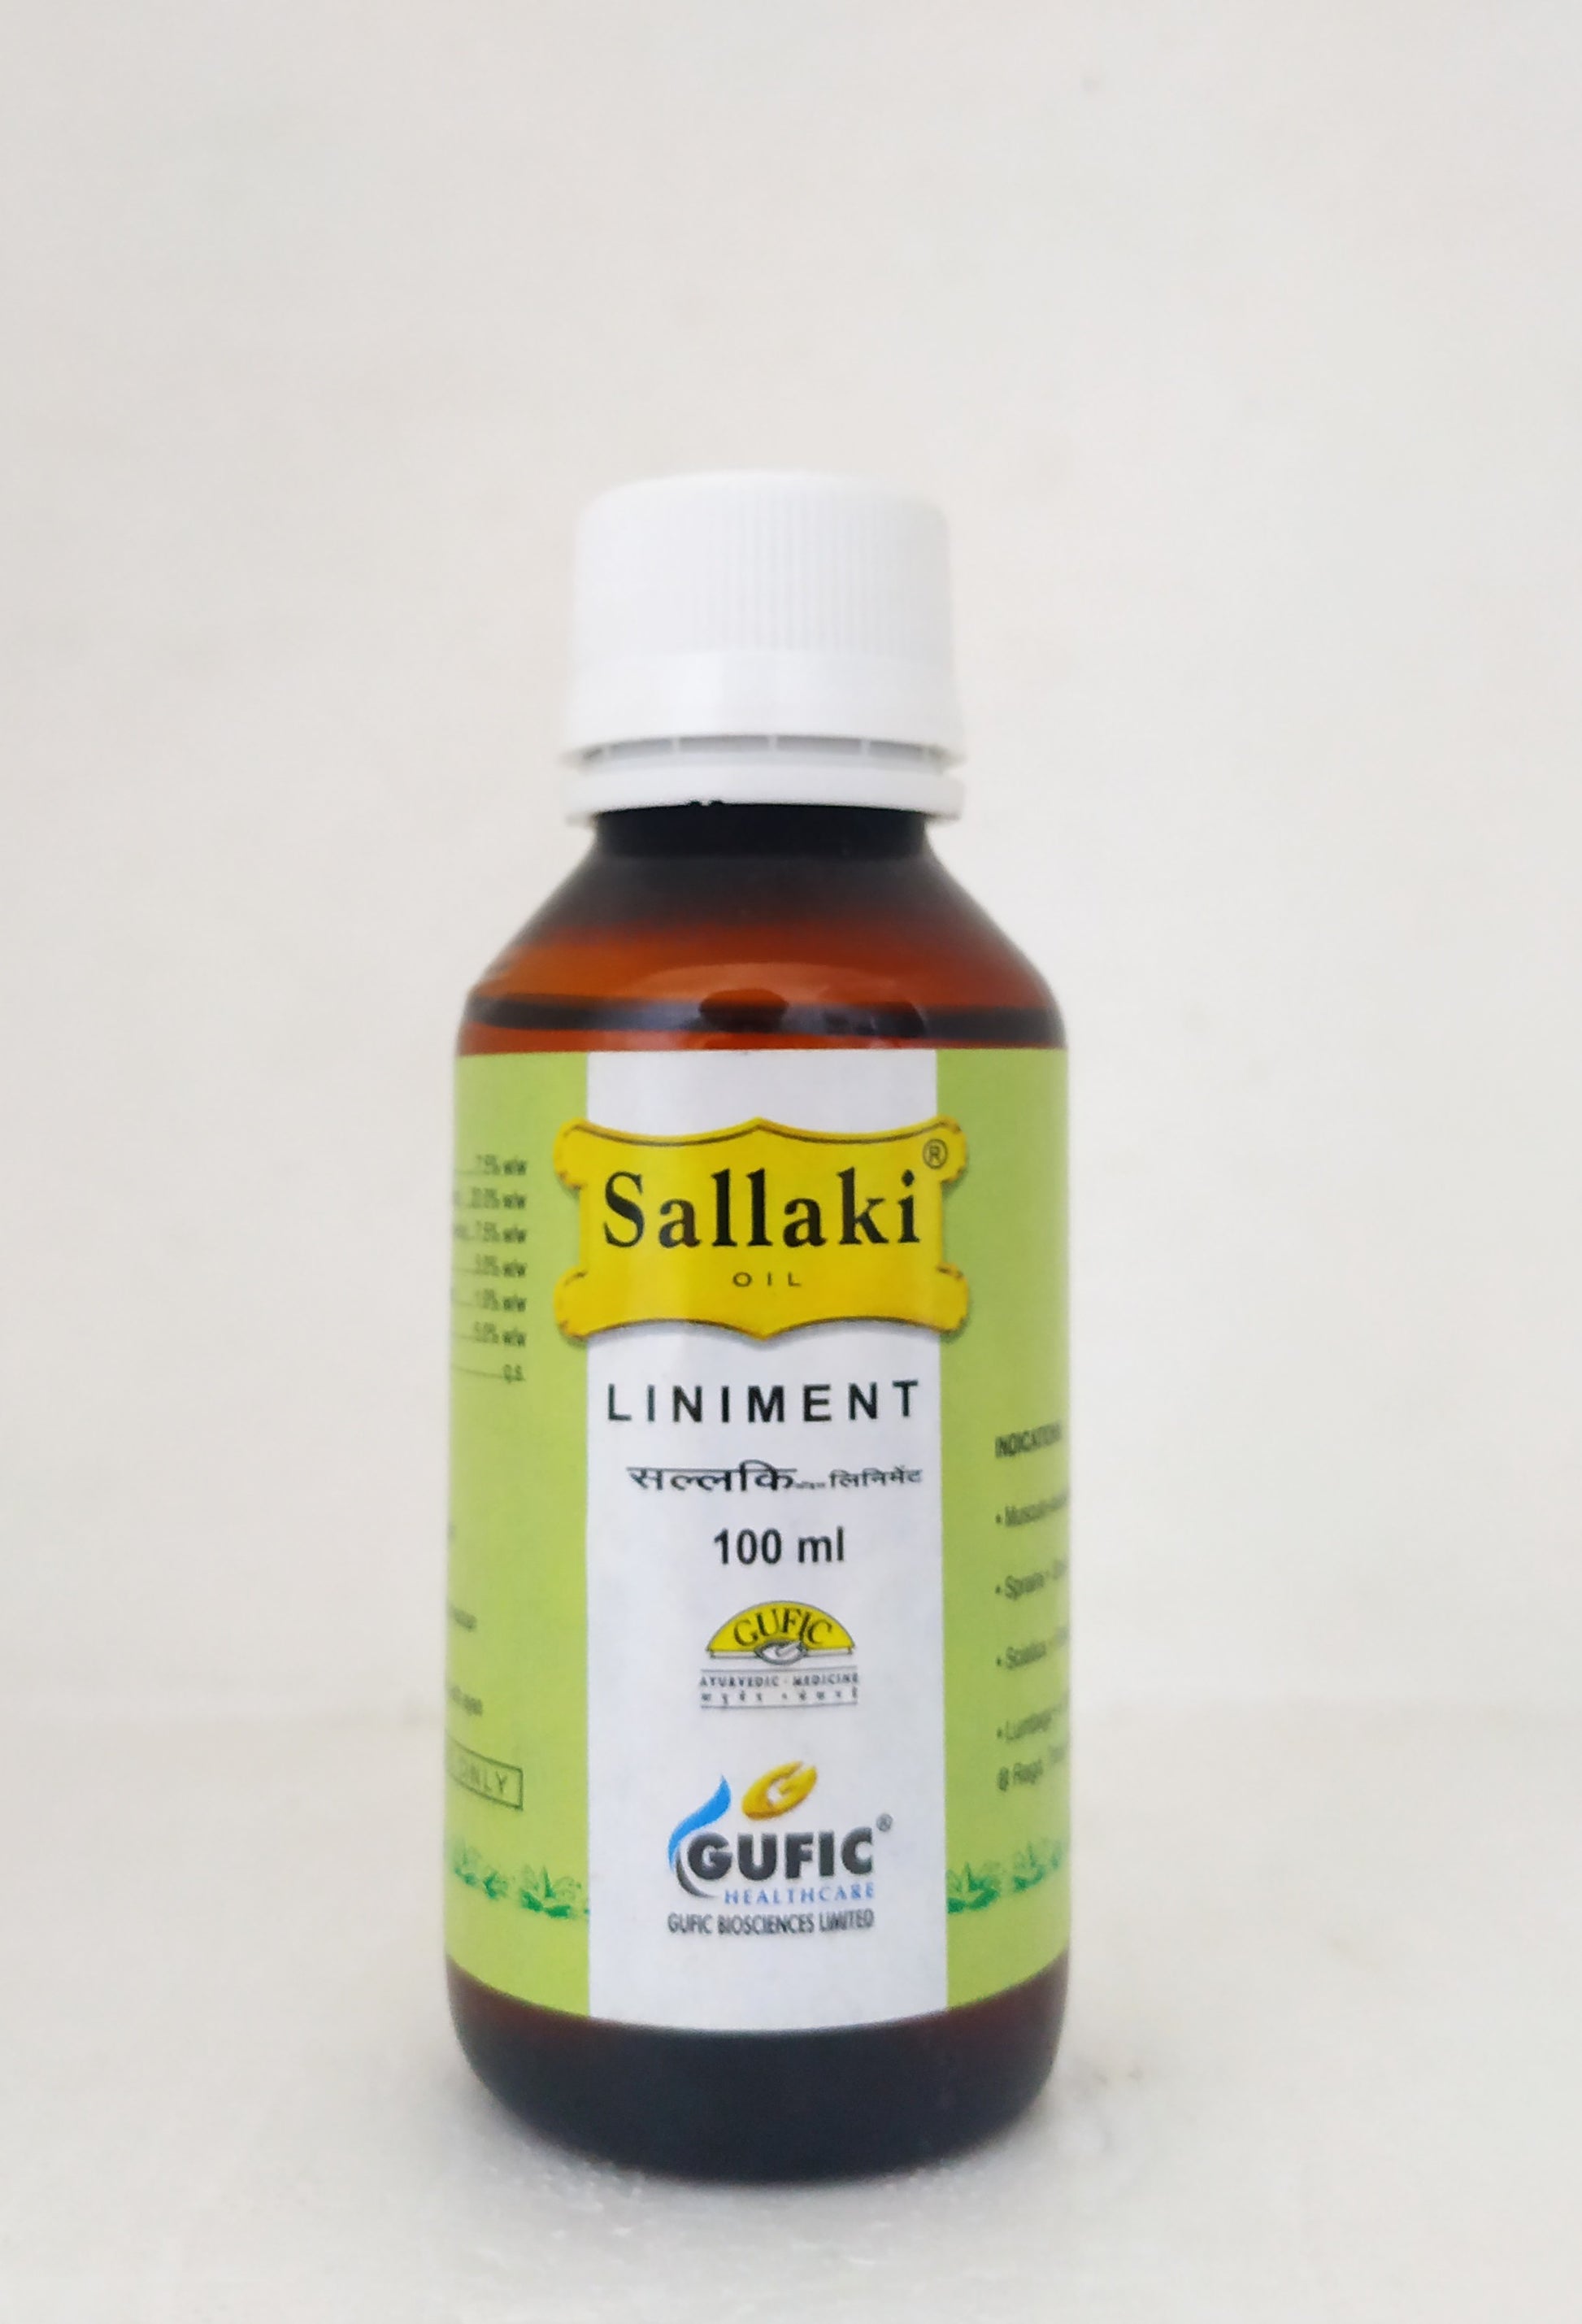 Shop Sallaki Liniment Oil 100ml at price 176.00 from Gufic Online - Ayush Care